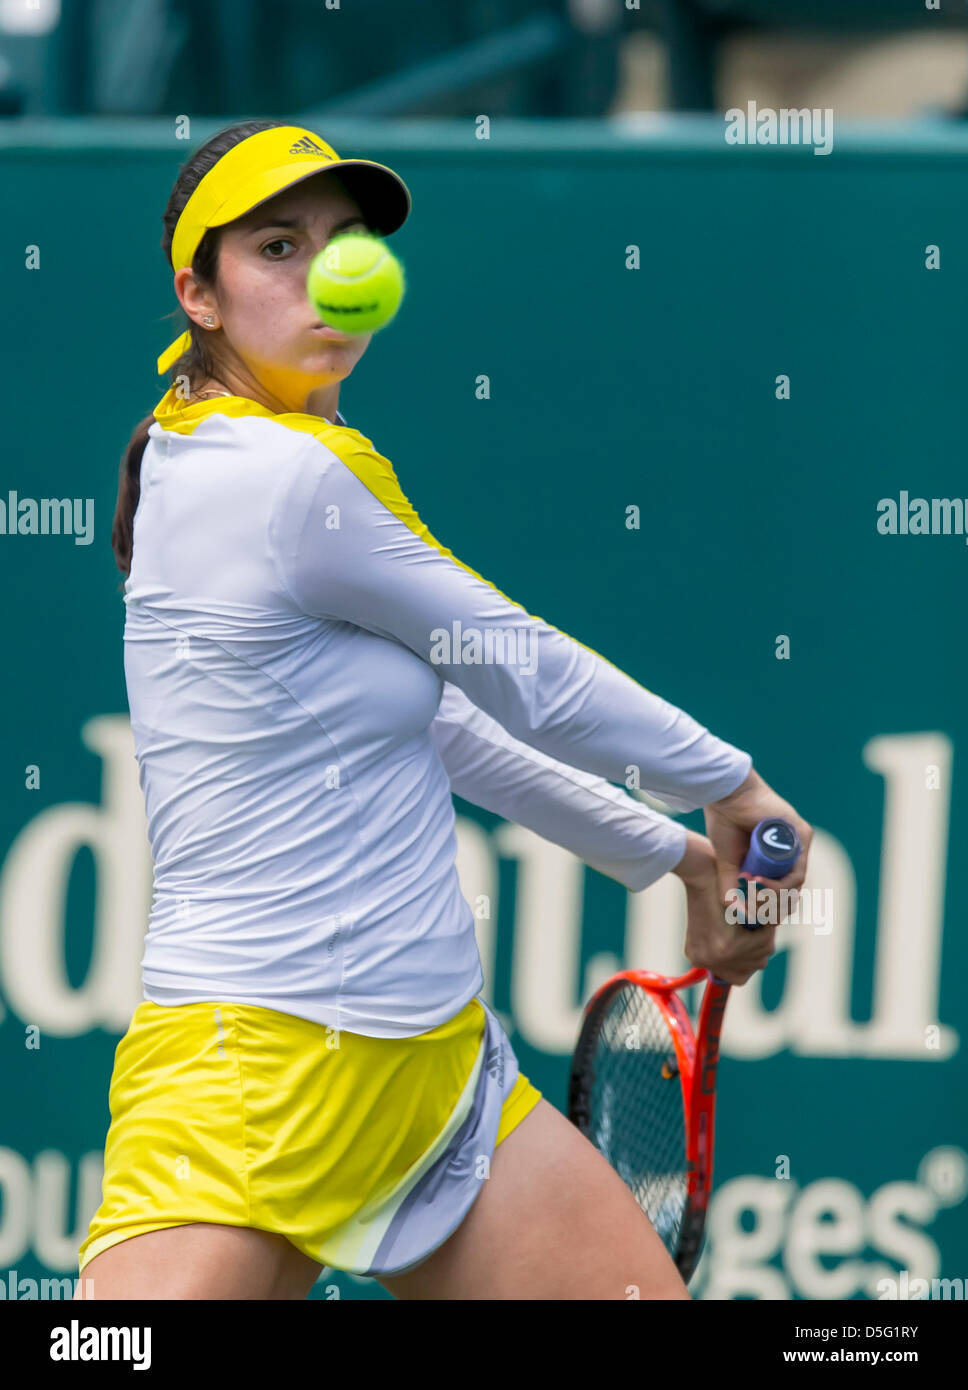 April 1, 2013 - Charleston, SC, U.S. - CHARESTON, SC - APR 01, 2013: Christina Mchale (USA) returns a volley from Varvara Lepchenko (USA) during first round play at the Family Circle Tennis Center in Charleston, SC. Lepchencko defeats Mchale 6-3, 4-6, 6-2. Stock Photo